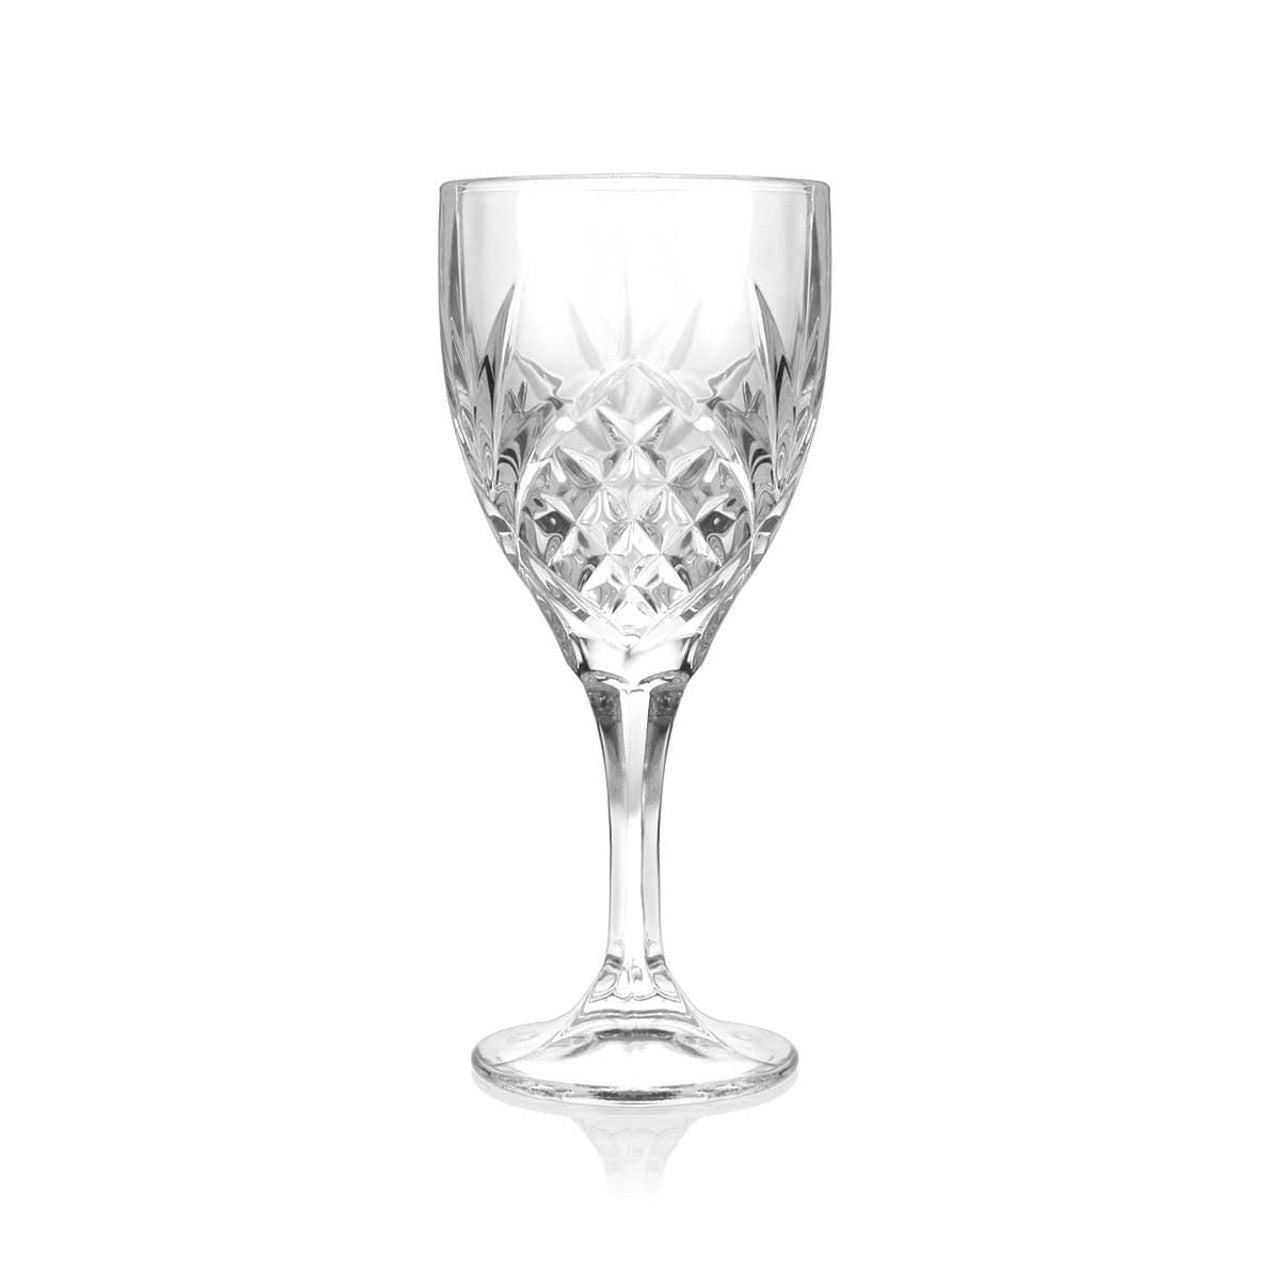 Tipperary Crystal Belvedere Set of 6 Wine Glasses